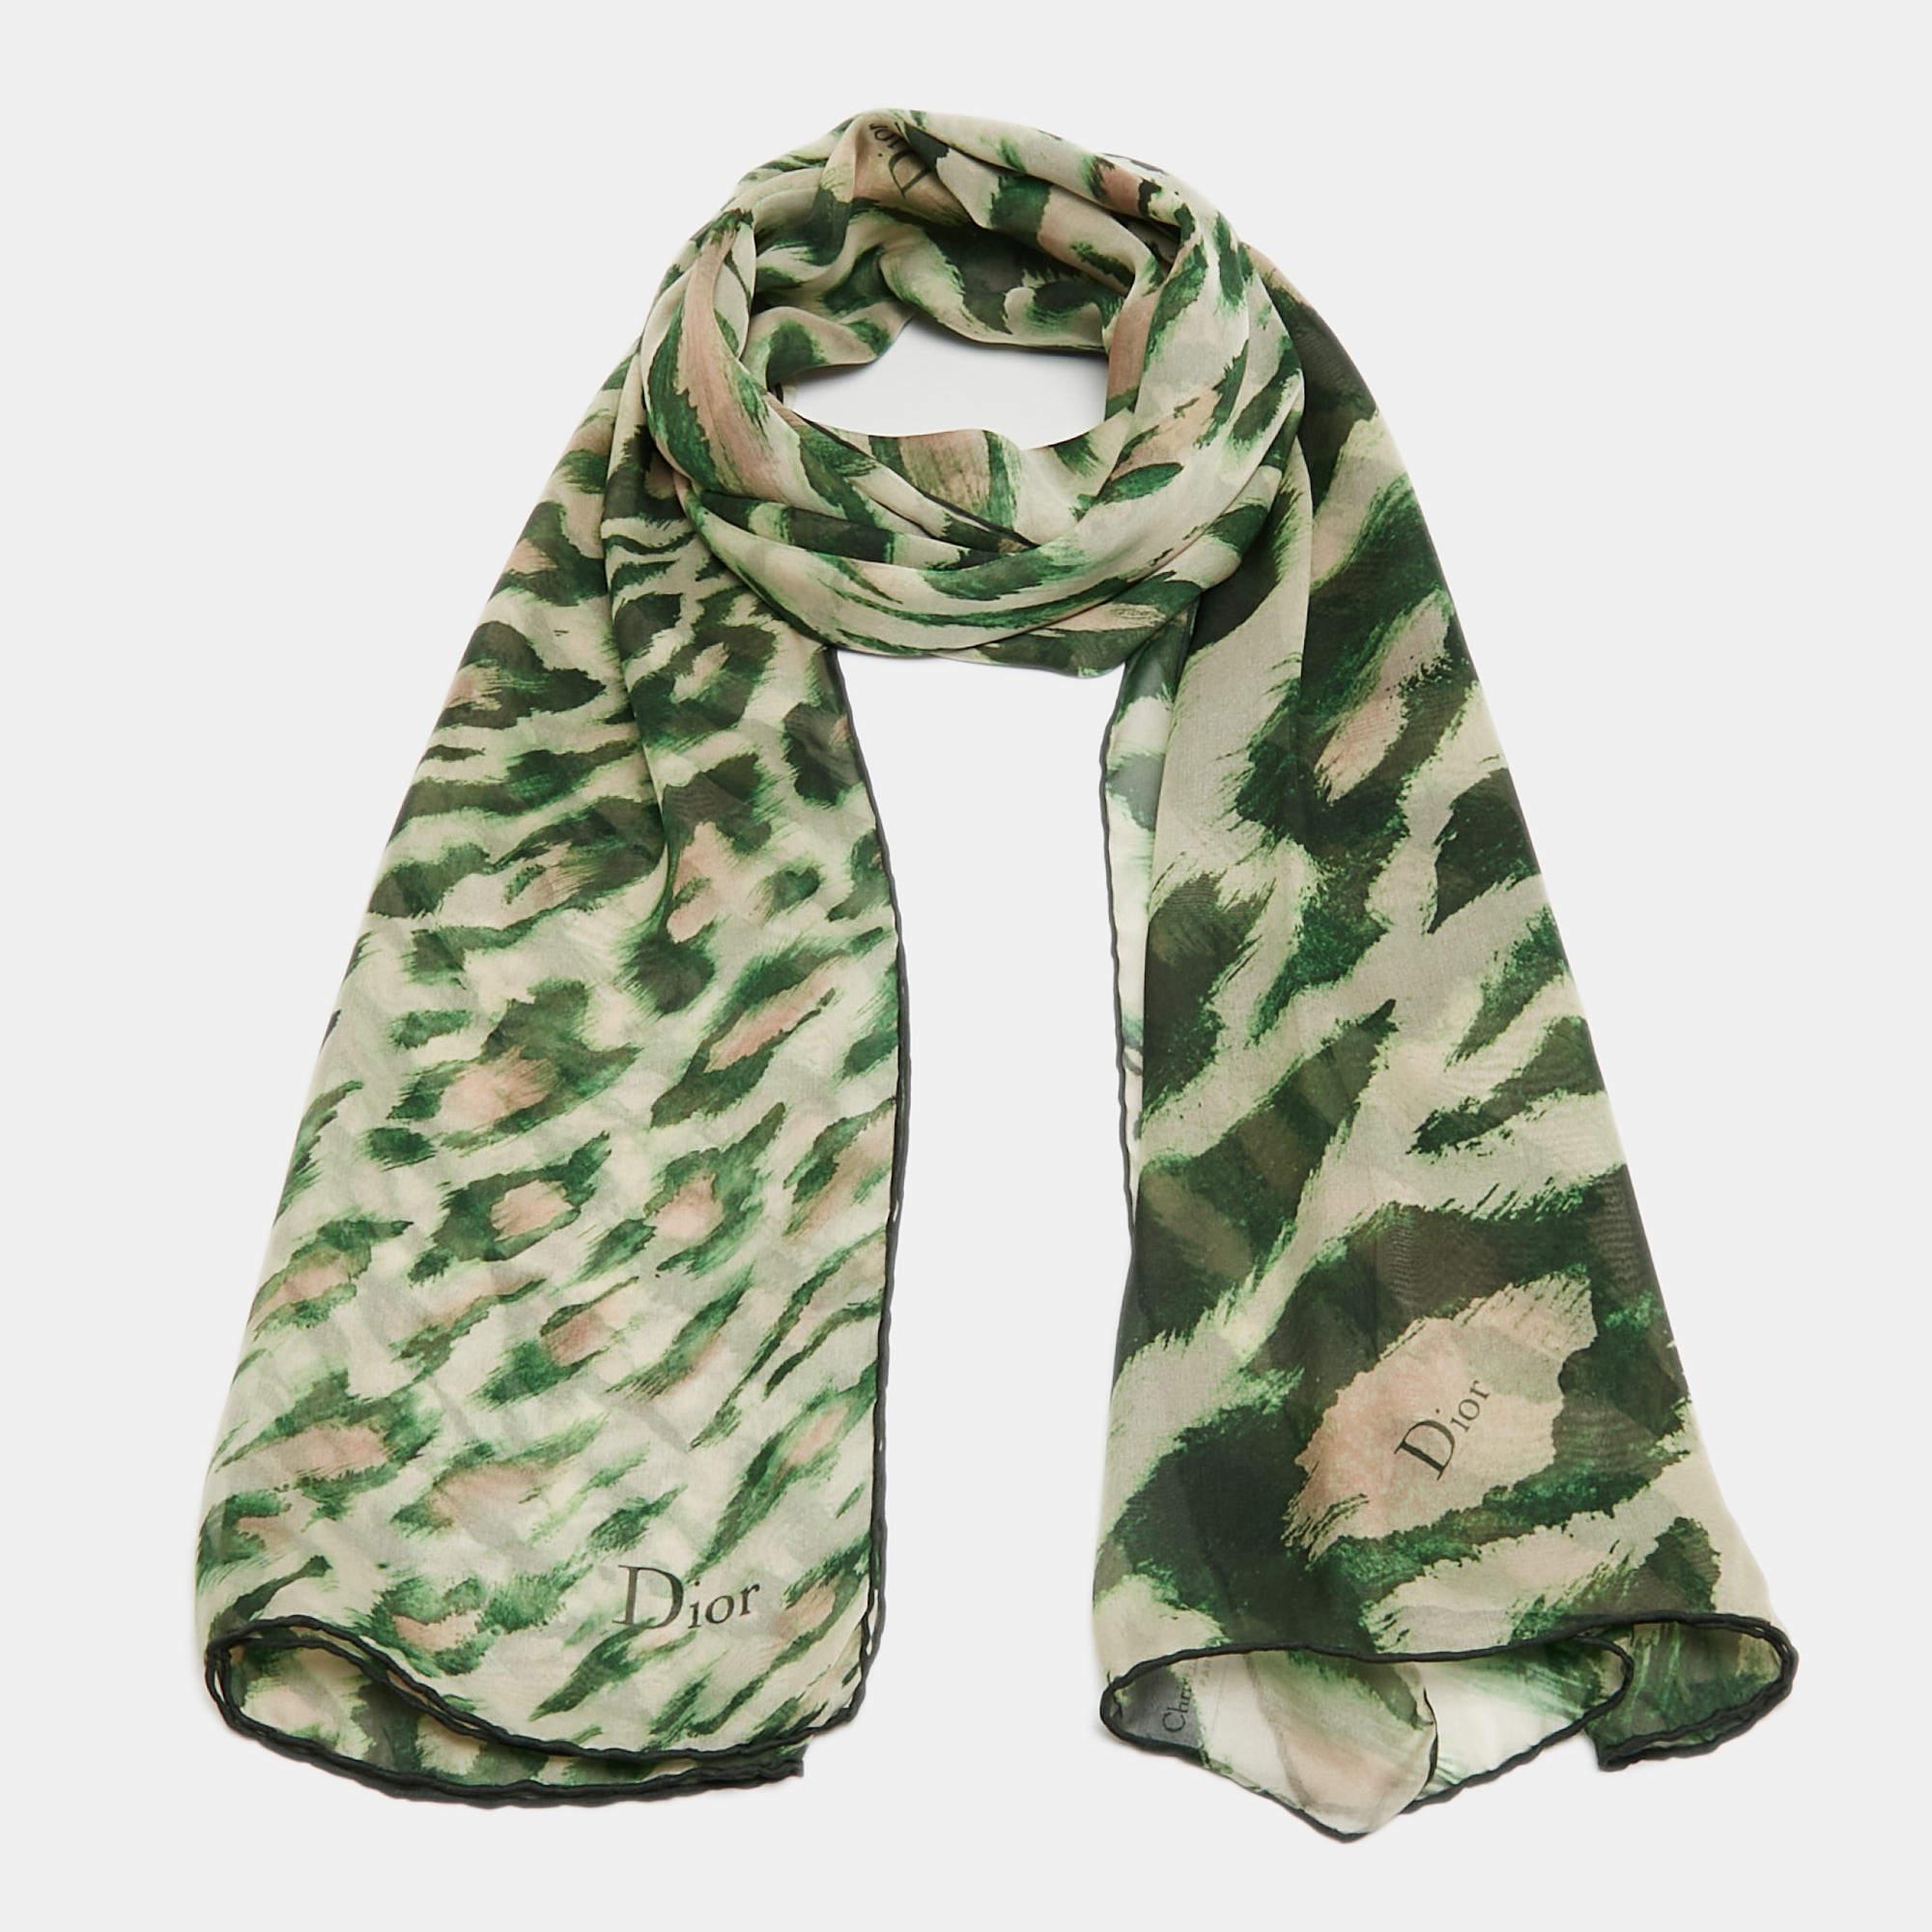 Classy and stylish are some words that come to our minds when we look at the scarf. The label brings you this versatile creation made from luxurious materials that you style with many outfits.

